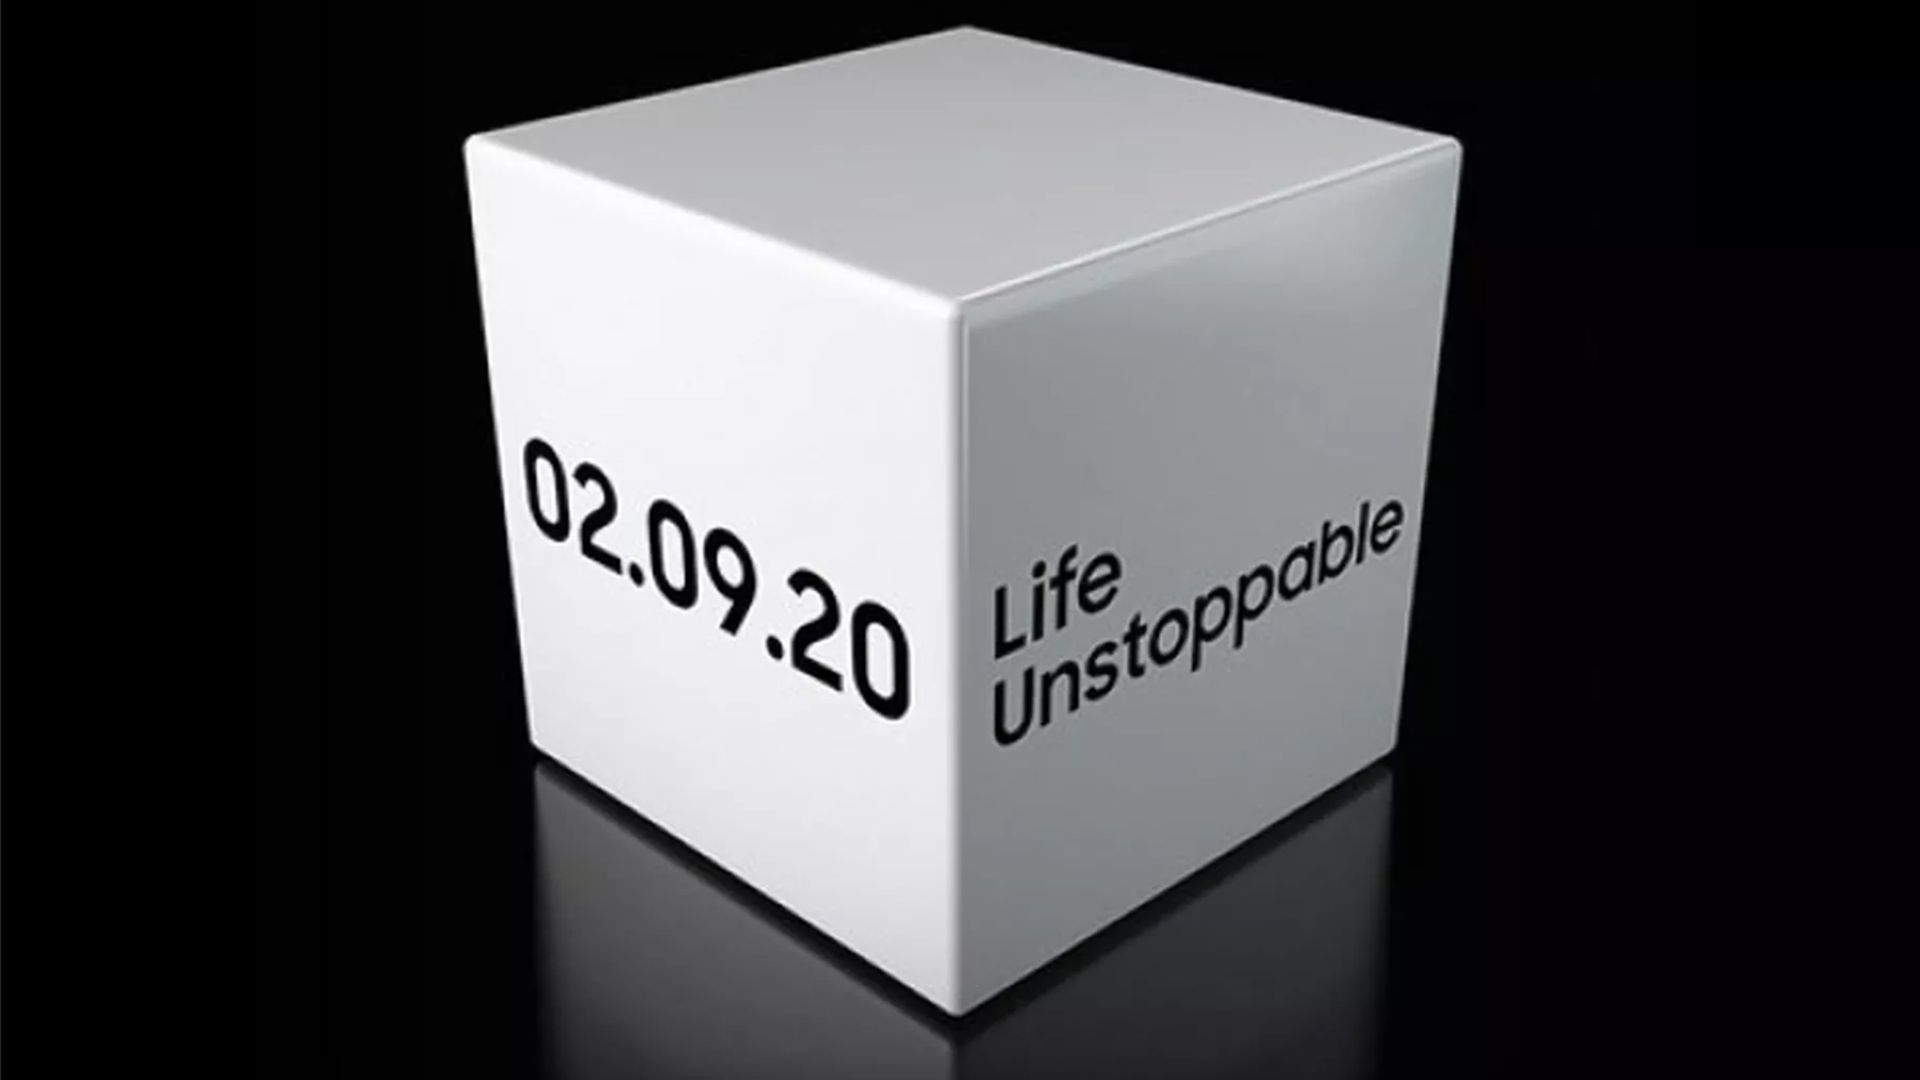 samsung life unstoppable